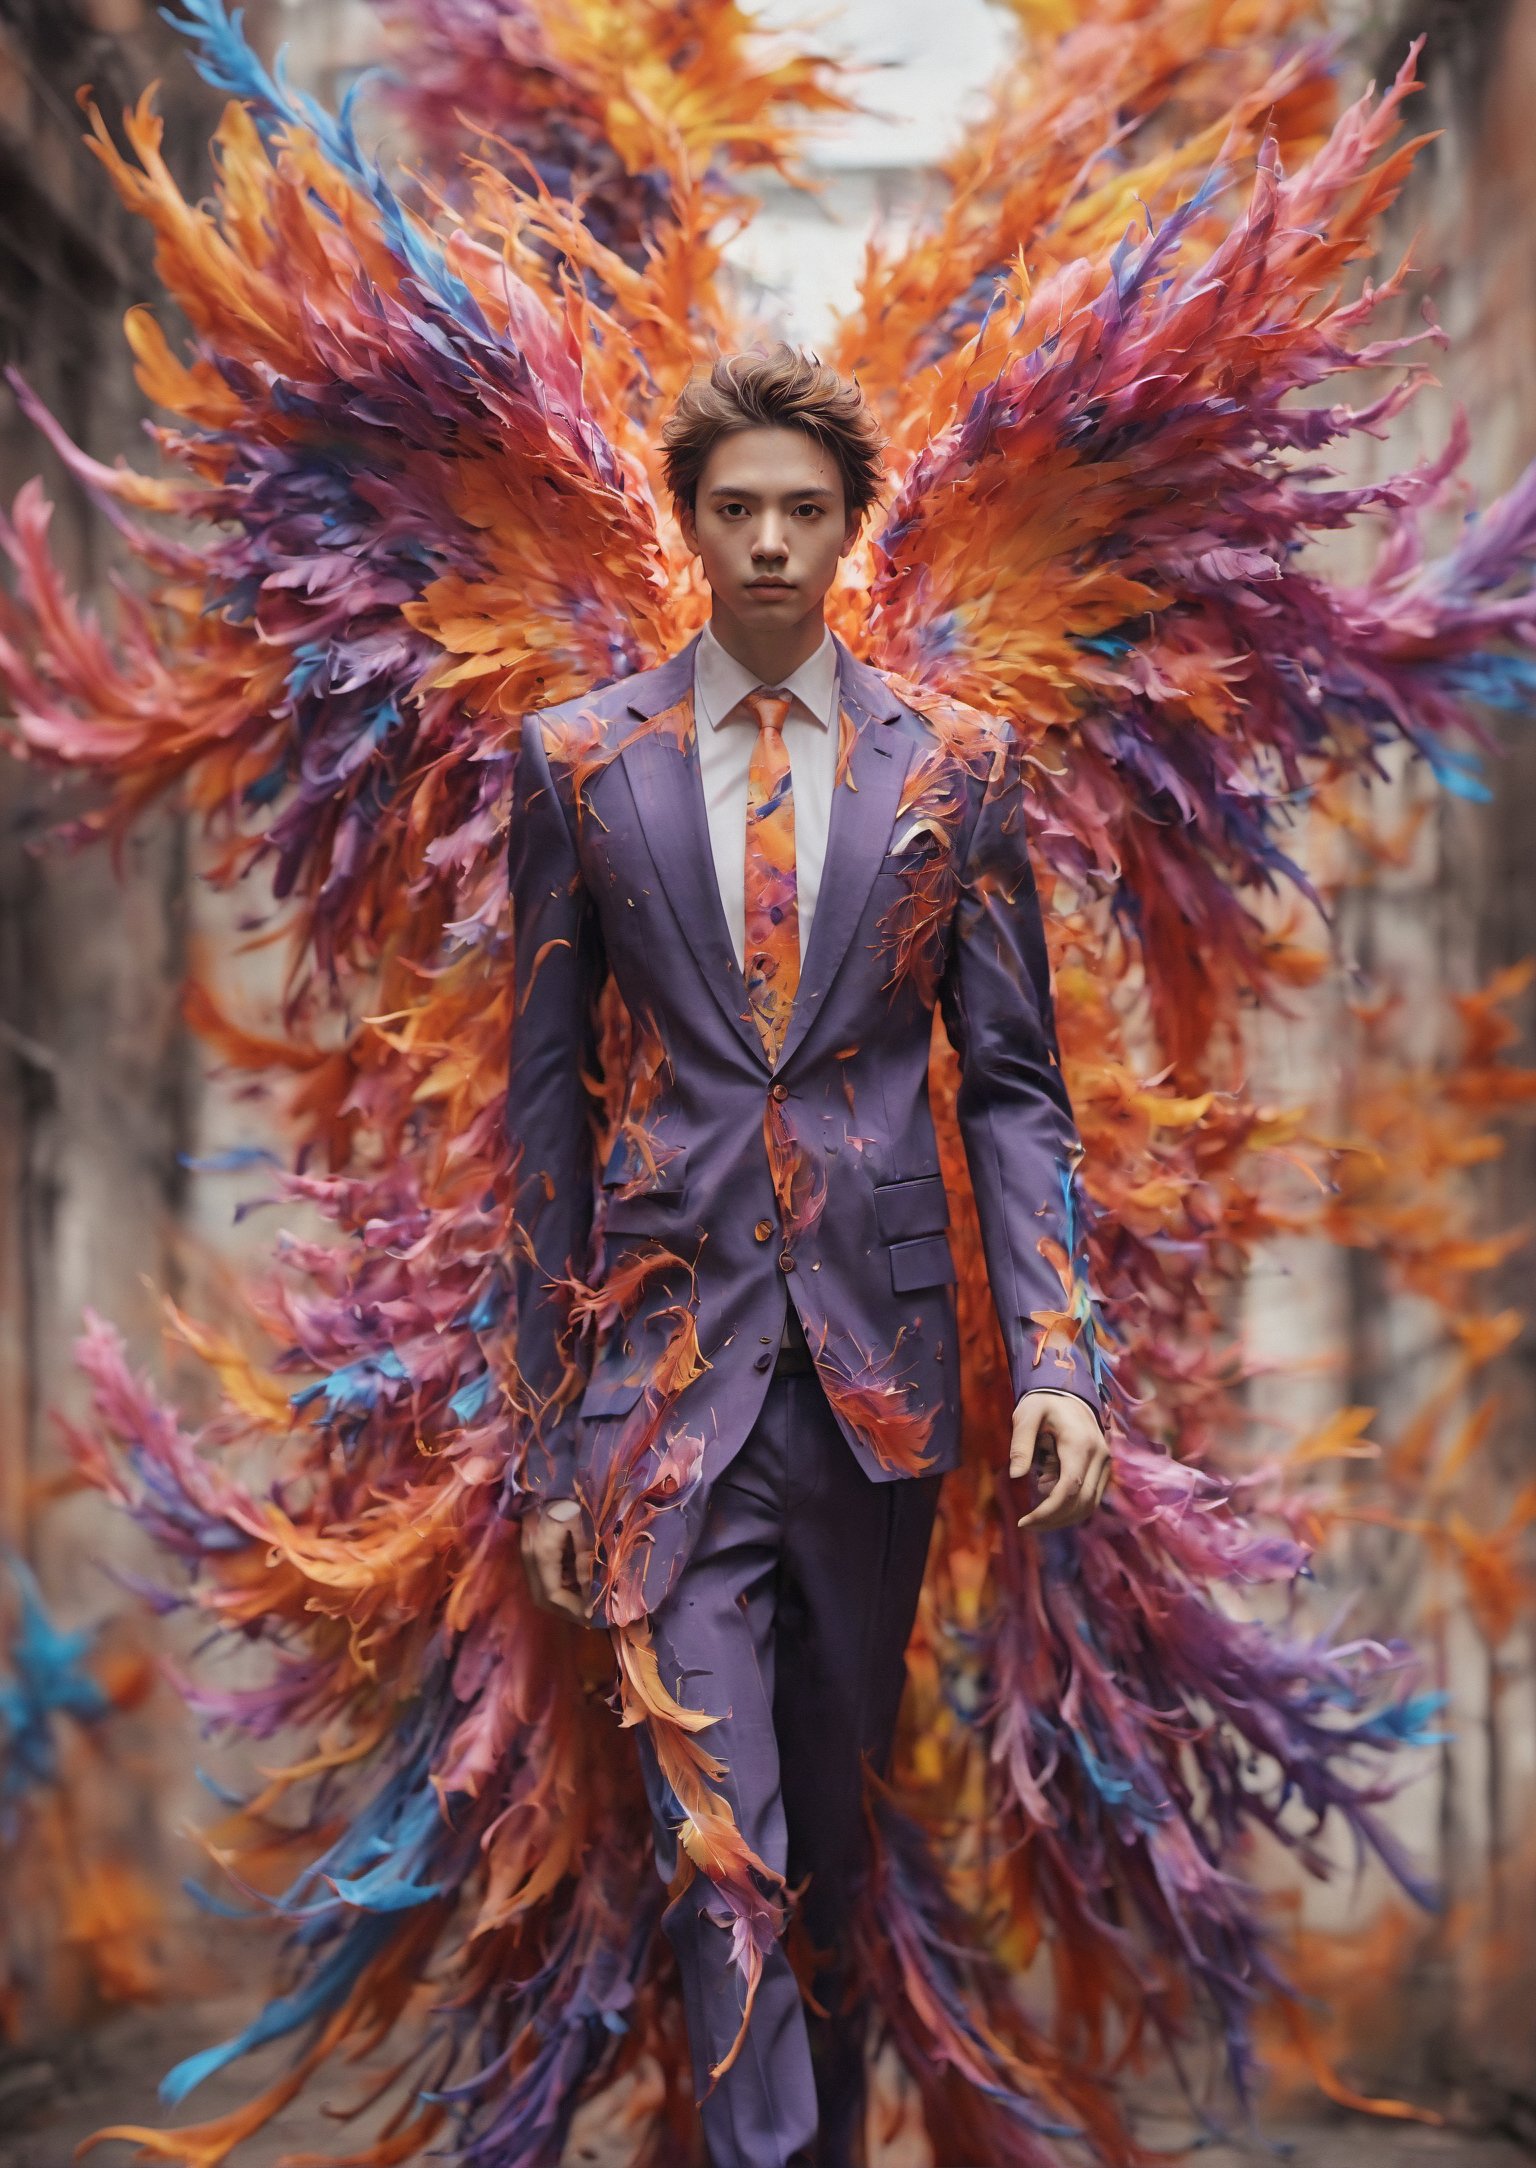 Create an image of a young man wearing a suit, featuring vibrant, random color  wings extending from his back. Random movement The background should be plain white, emphasizing the contrast and detailing of the beauty wings and the sharpness of the suit. The man should appear poised and elegant, with the wings unfurled to showcase a spectrum of vivid hues, blending seamlessly from one color to another. The focus should be on the meticulous details of the wings’ feathers and the suit’s fabric, capturing a harmonious blend of natural and refined elements, wings,Stylish, close up,l3min,xxmixgirl,fire element,wings